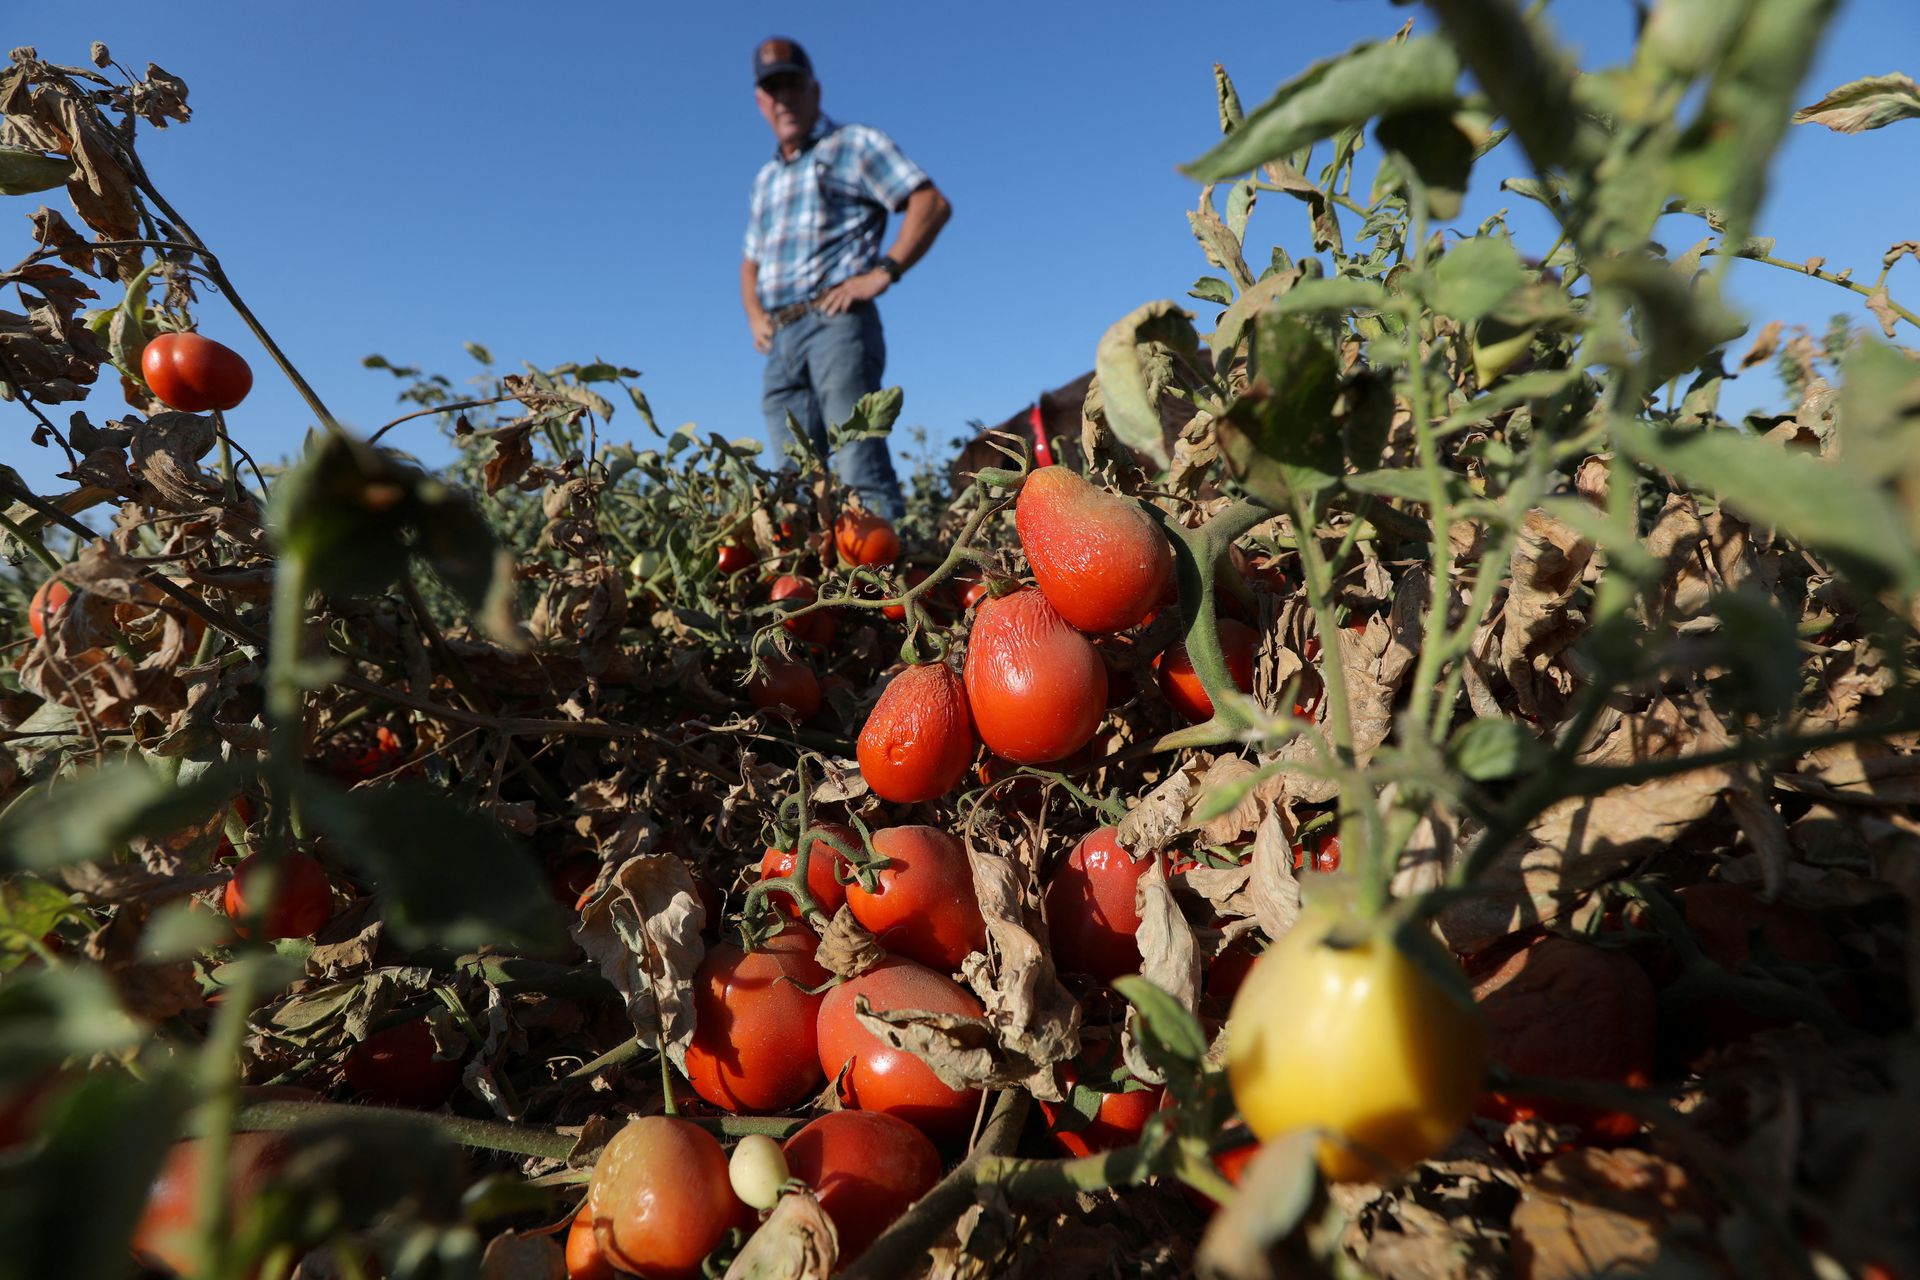 Processing tomatoes dried up by heat and drought hang on vines on a farm belonging to farmer Aaron Barcellos in Los Banos, California, U.S., 6 September 2022. Photo: Nathan Frandino / REUTERS